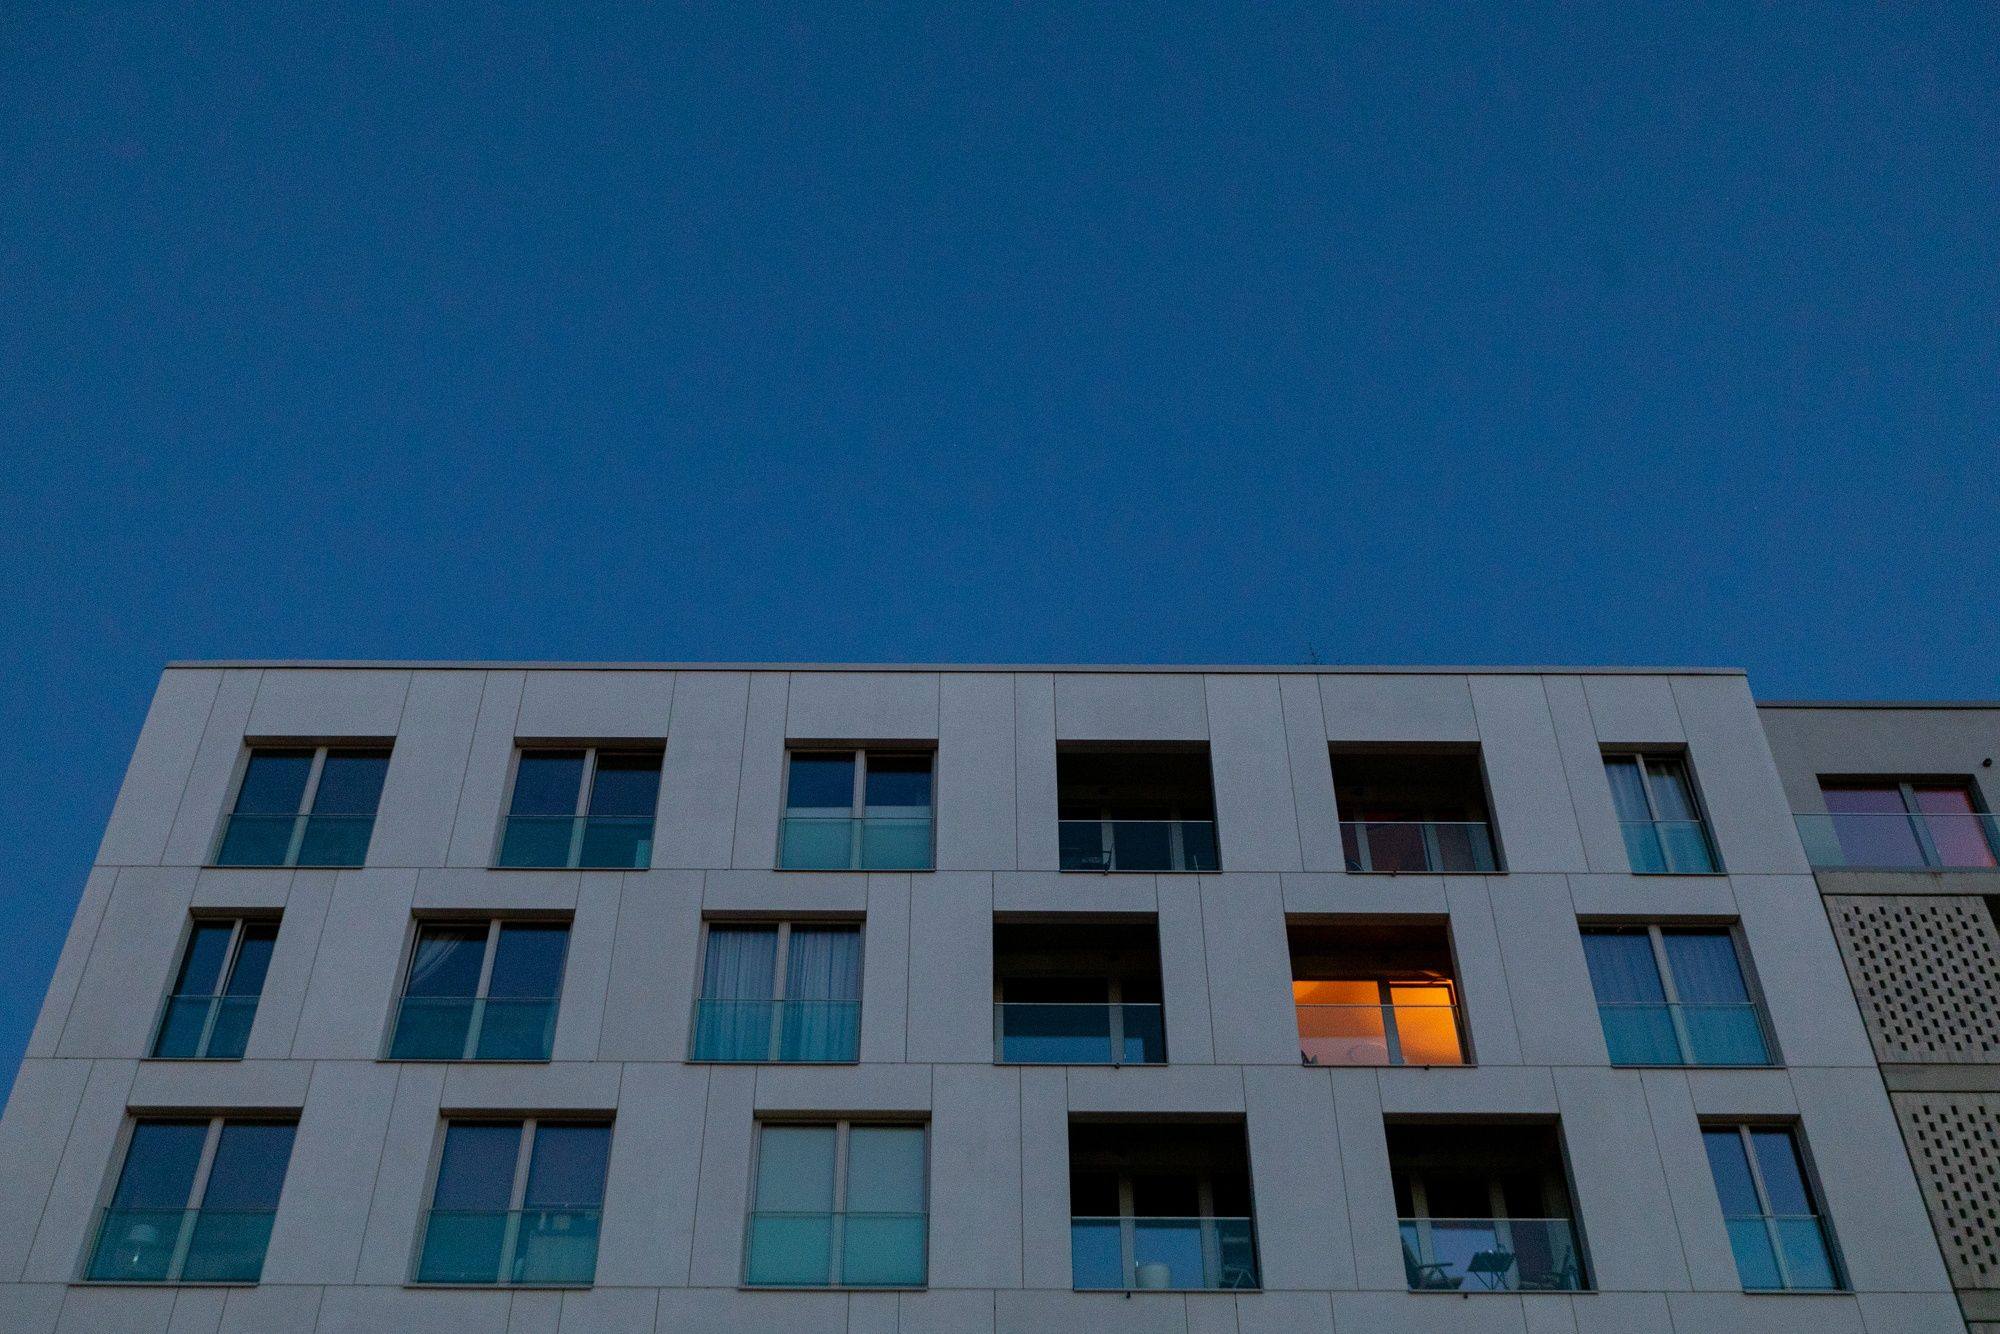 A light is on in a block of apartments at dusk in Berlin, Germany, on August 16. German citizens, municipalities and industrial consumers have been asked to save energy, as the German economy that is Europe’s growth engine faces problems including surging power prices. Photo: Bloomberg 